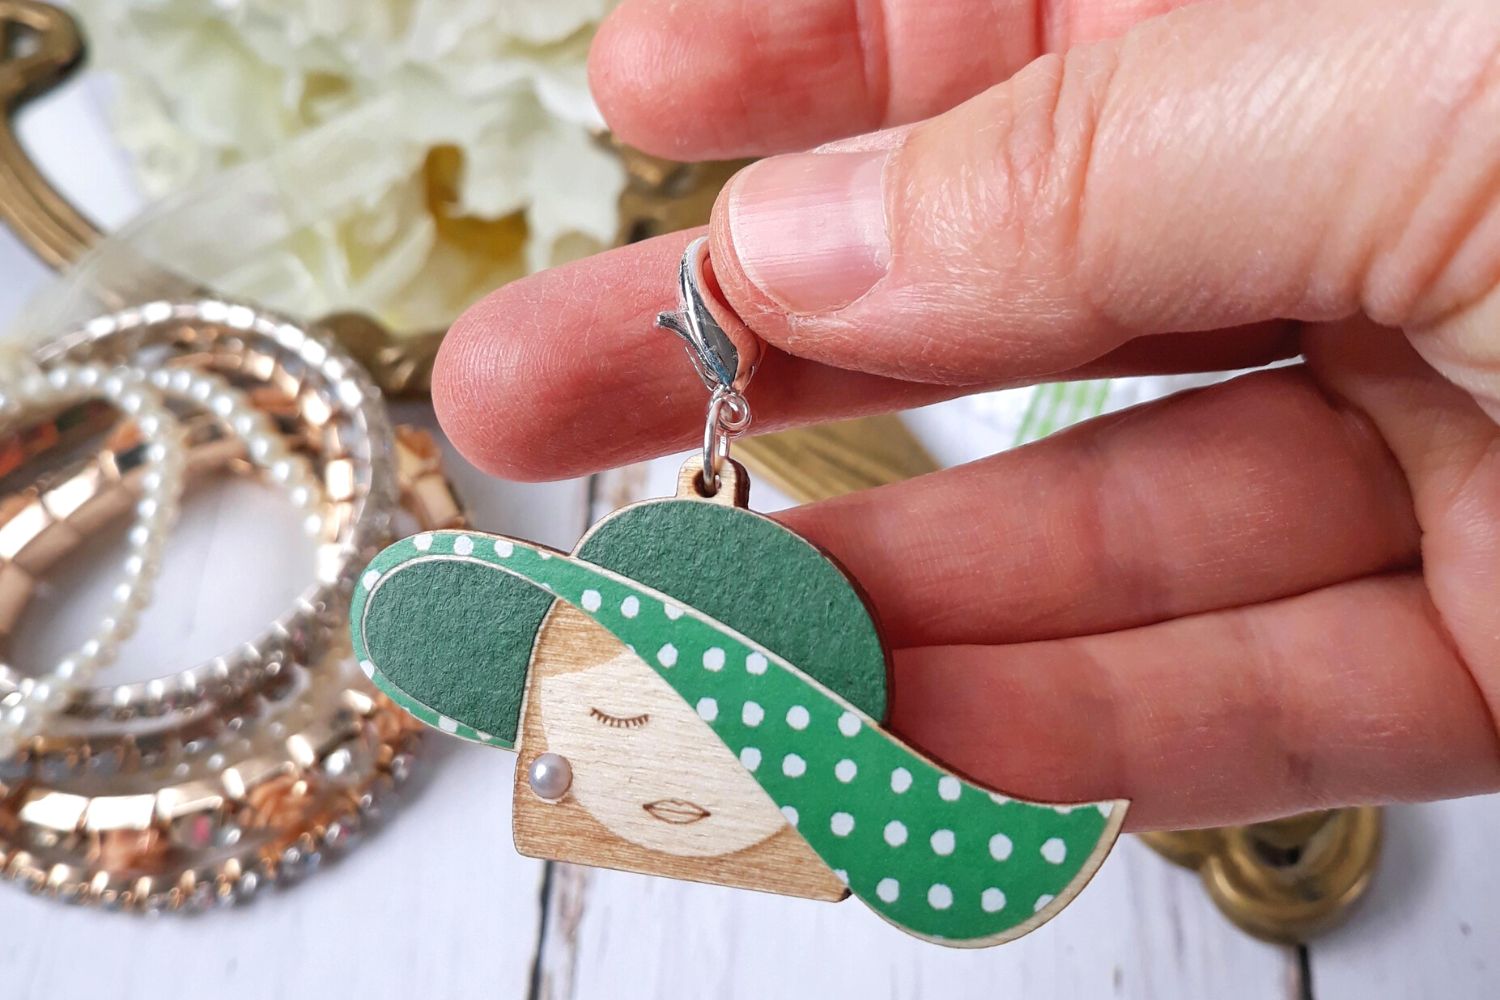 Hand holding wooden stitch marker of a lady with a polka dot hat